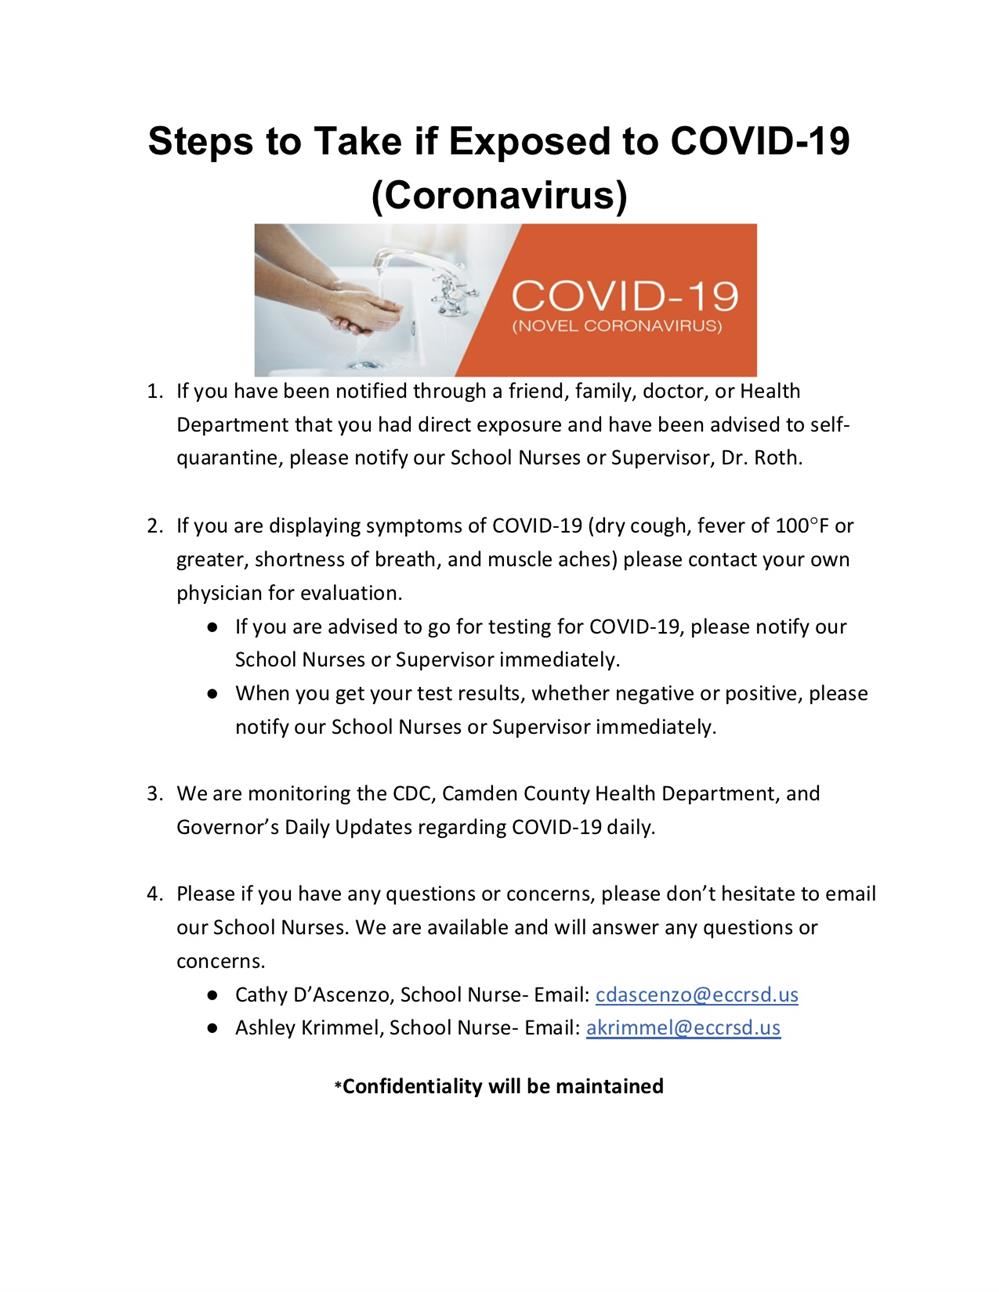 Steps to Take if Exposed to COVID-19